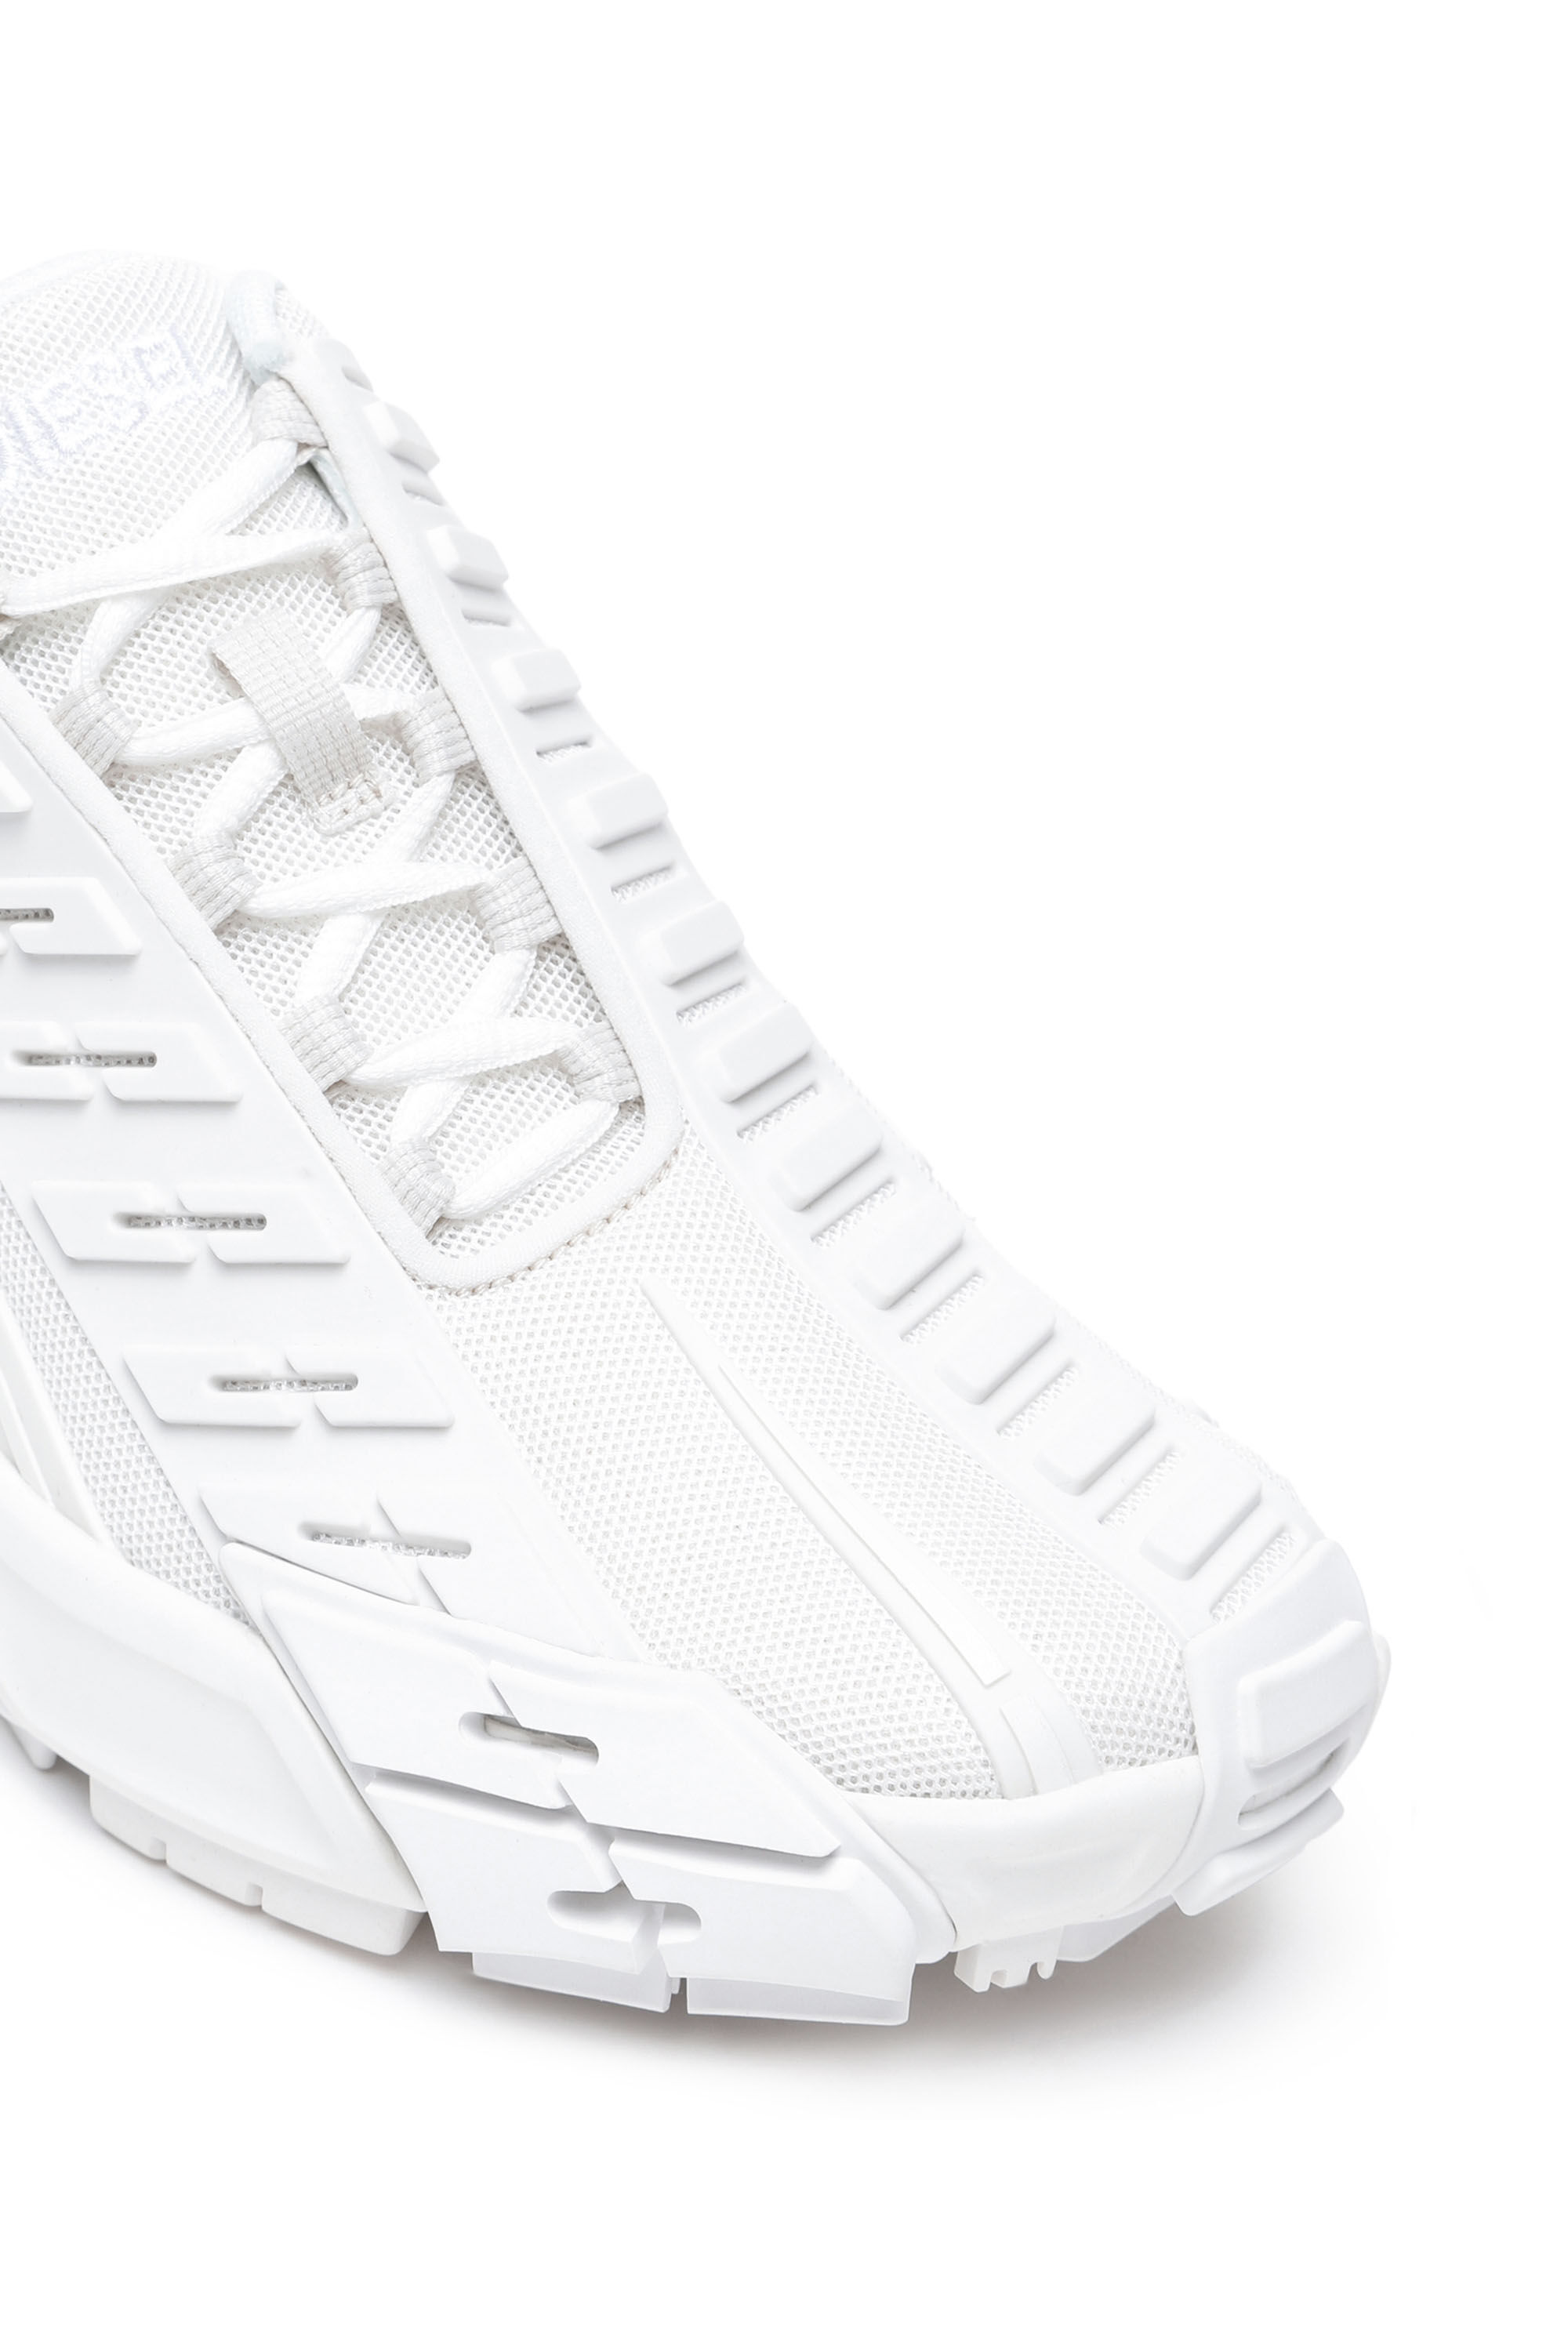 S-PROTOTYPE LOW Man: Chunky sneakers in mesh and rubber | Diesel